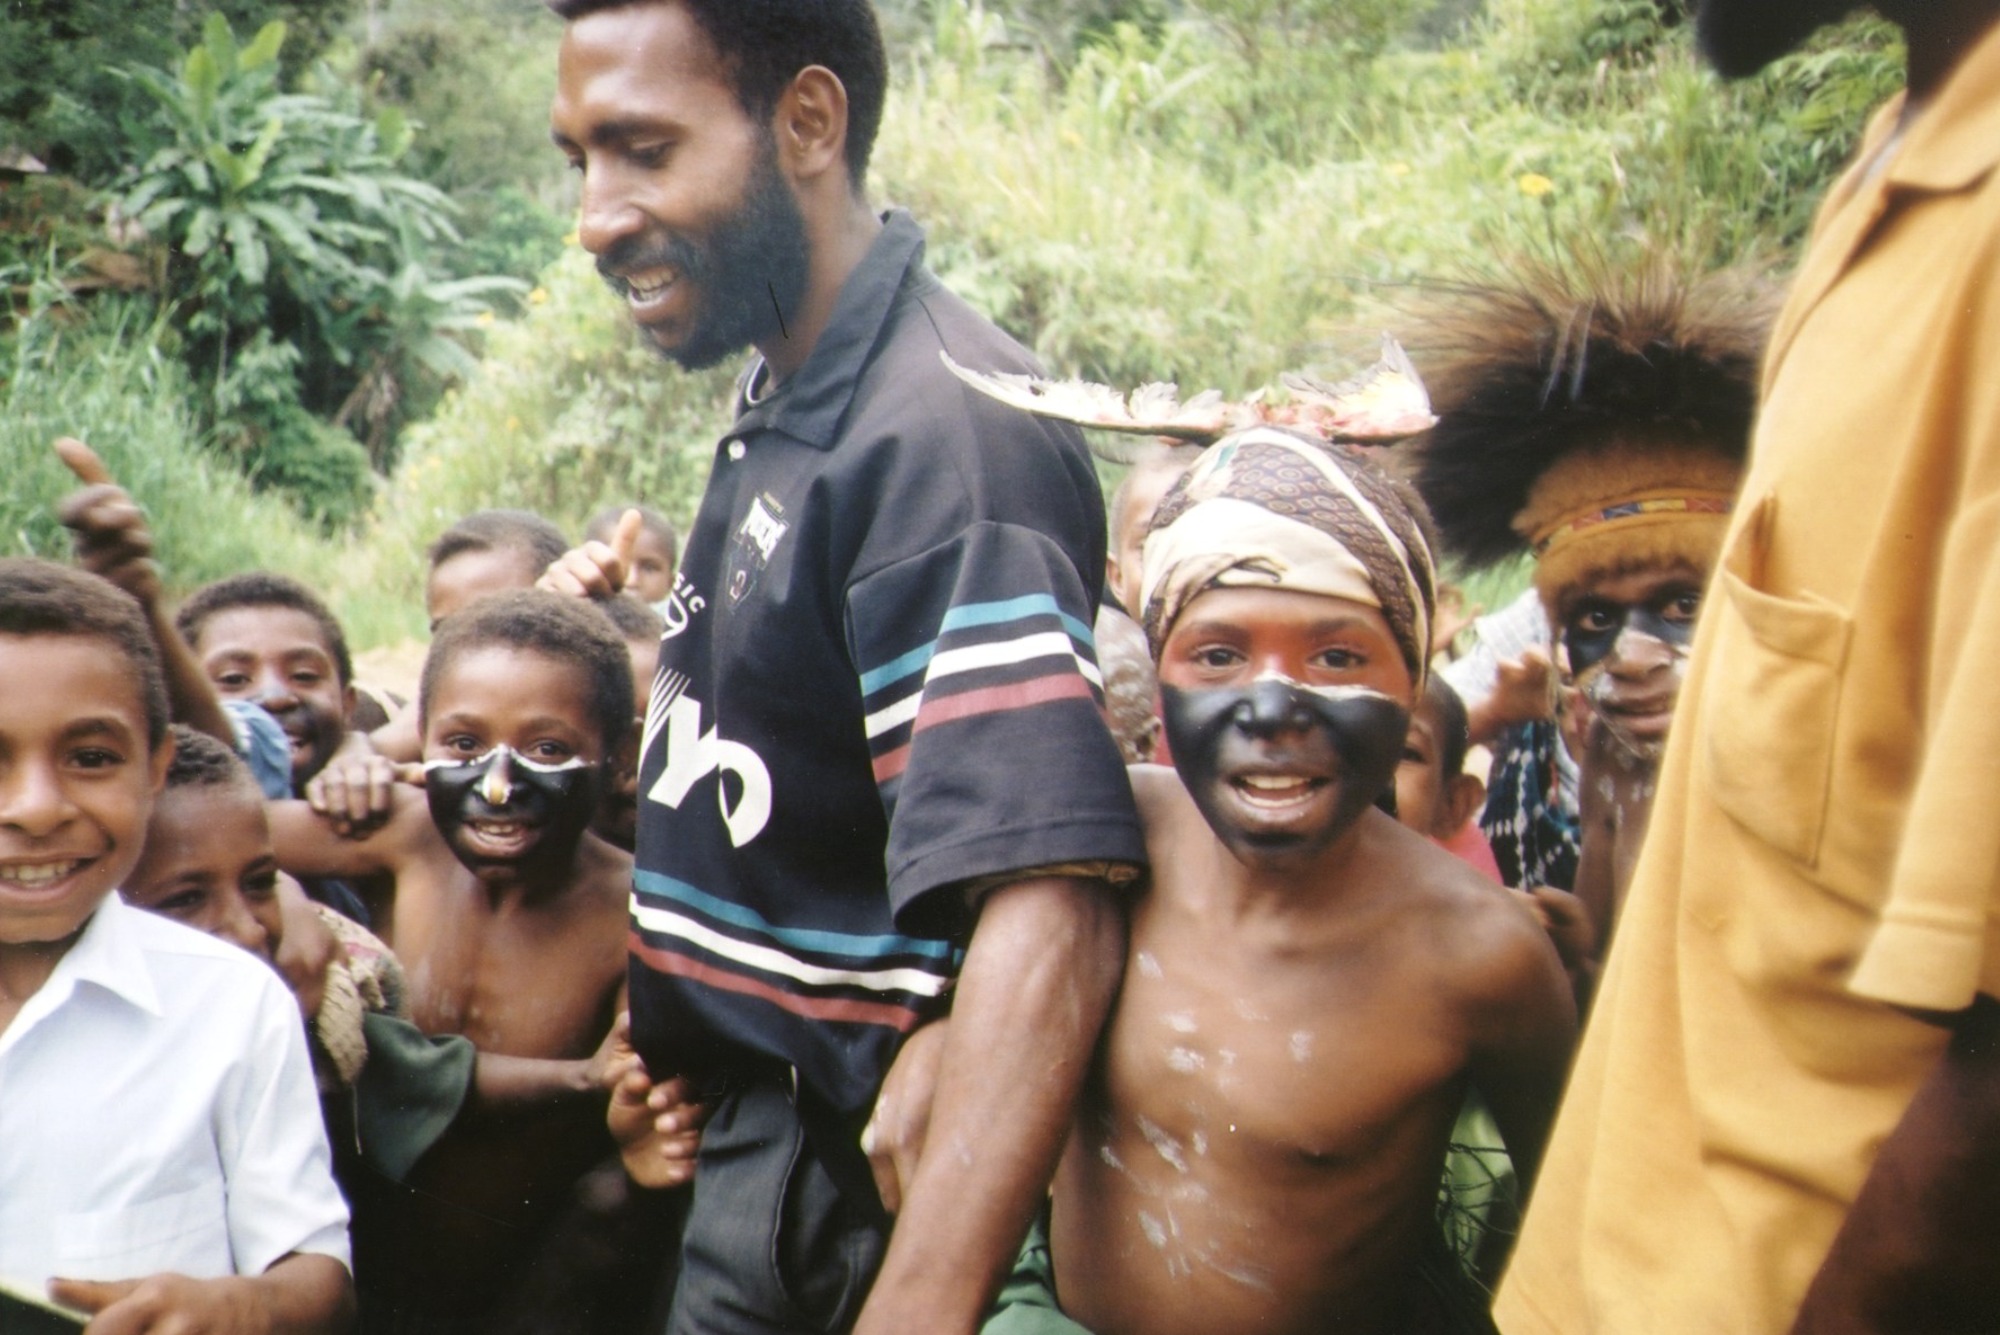 NPC and Papua New Guinea A Serious Look at the Impact of NPC on the Country